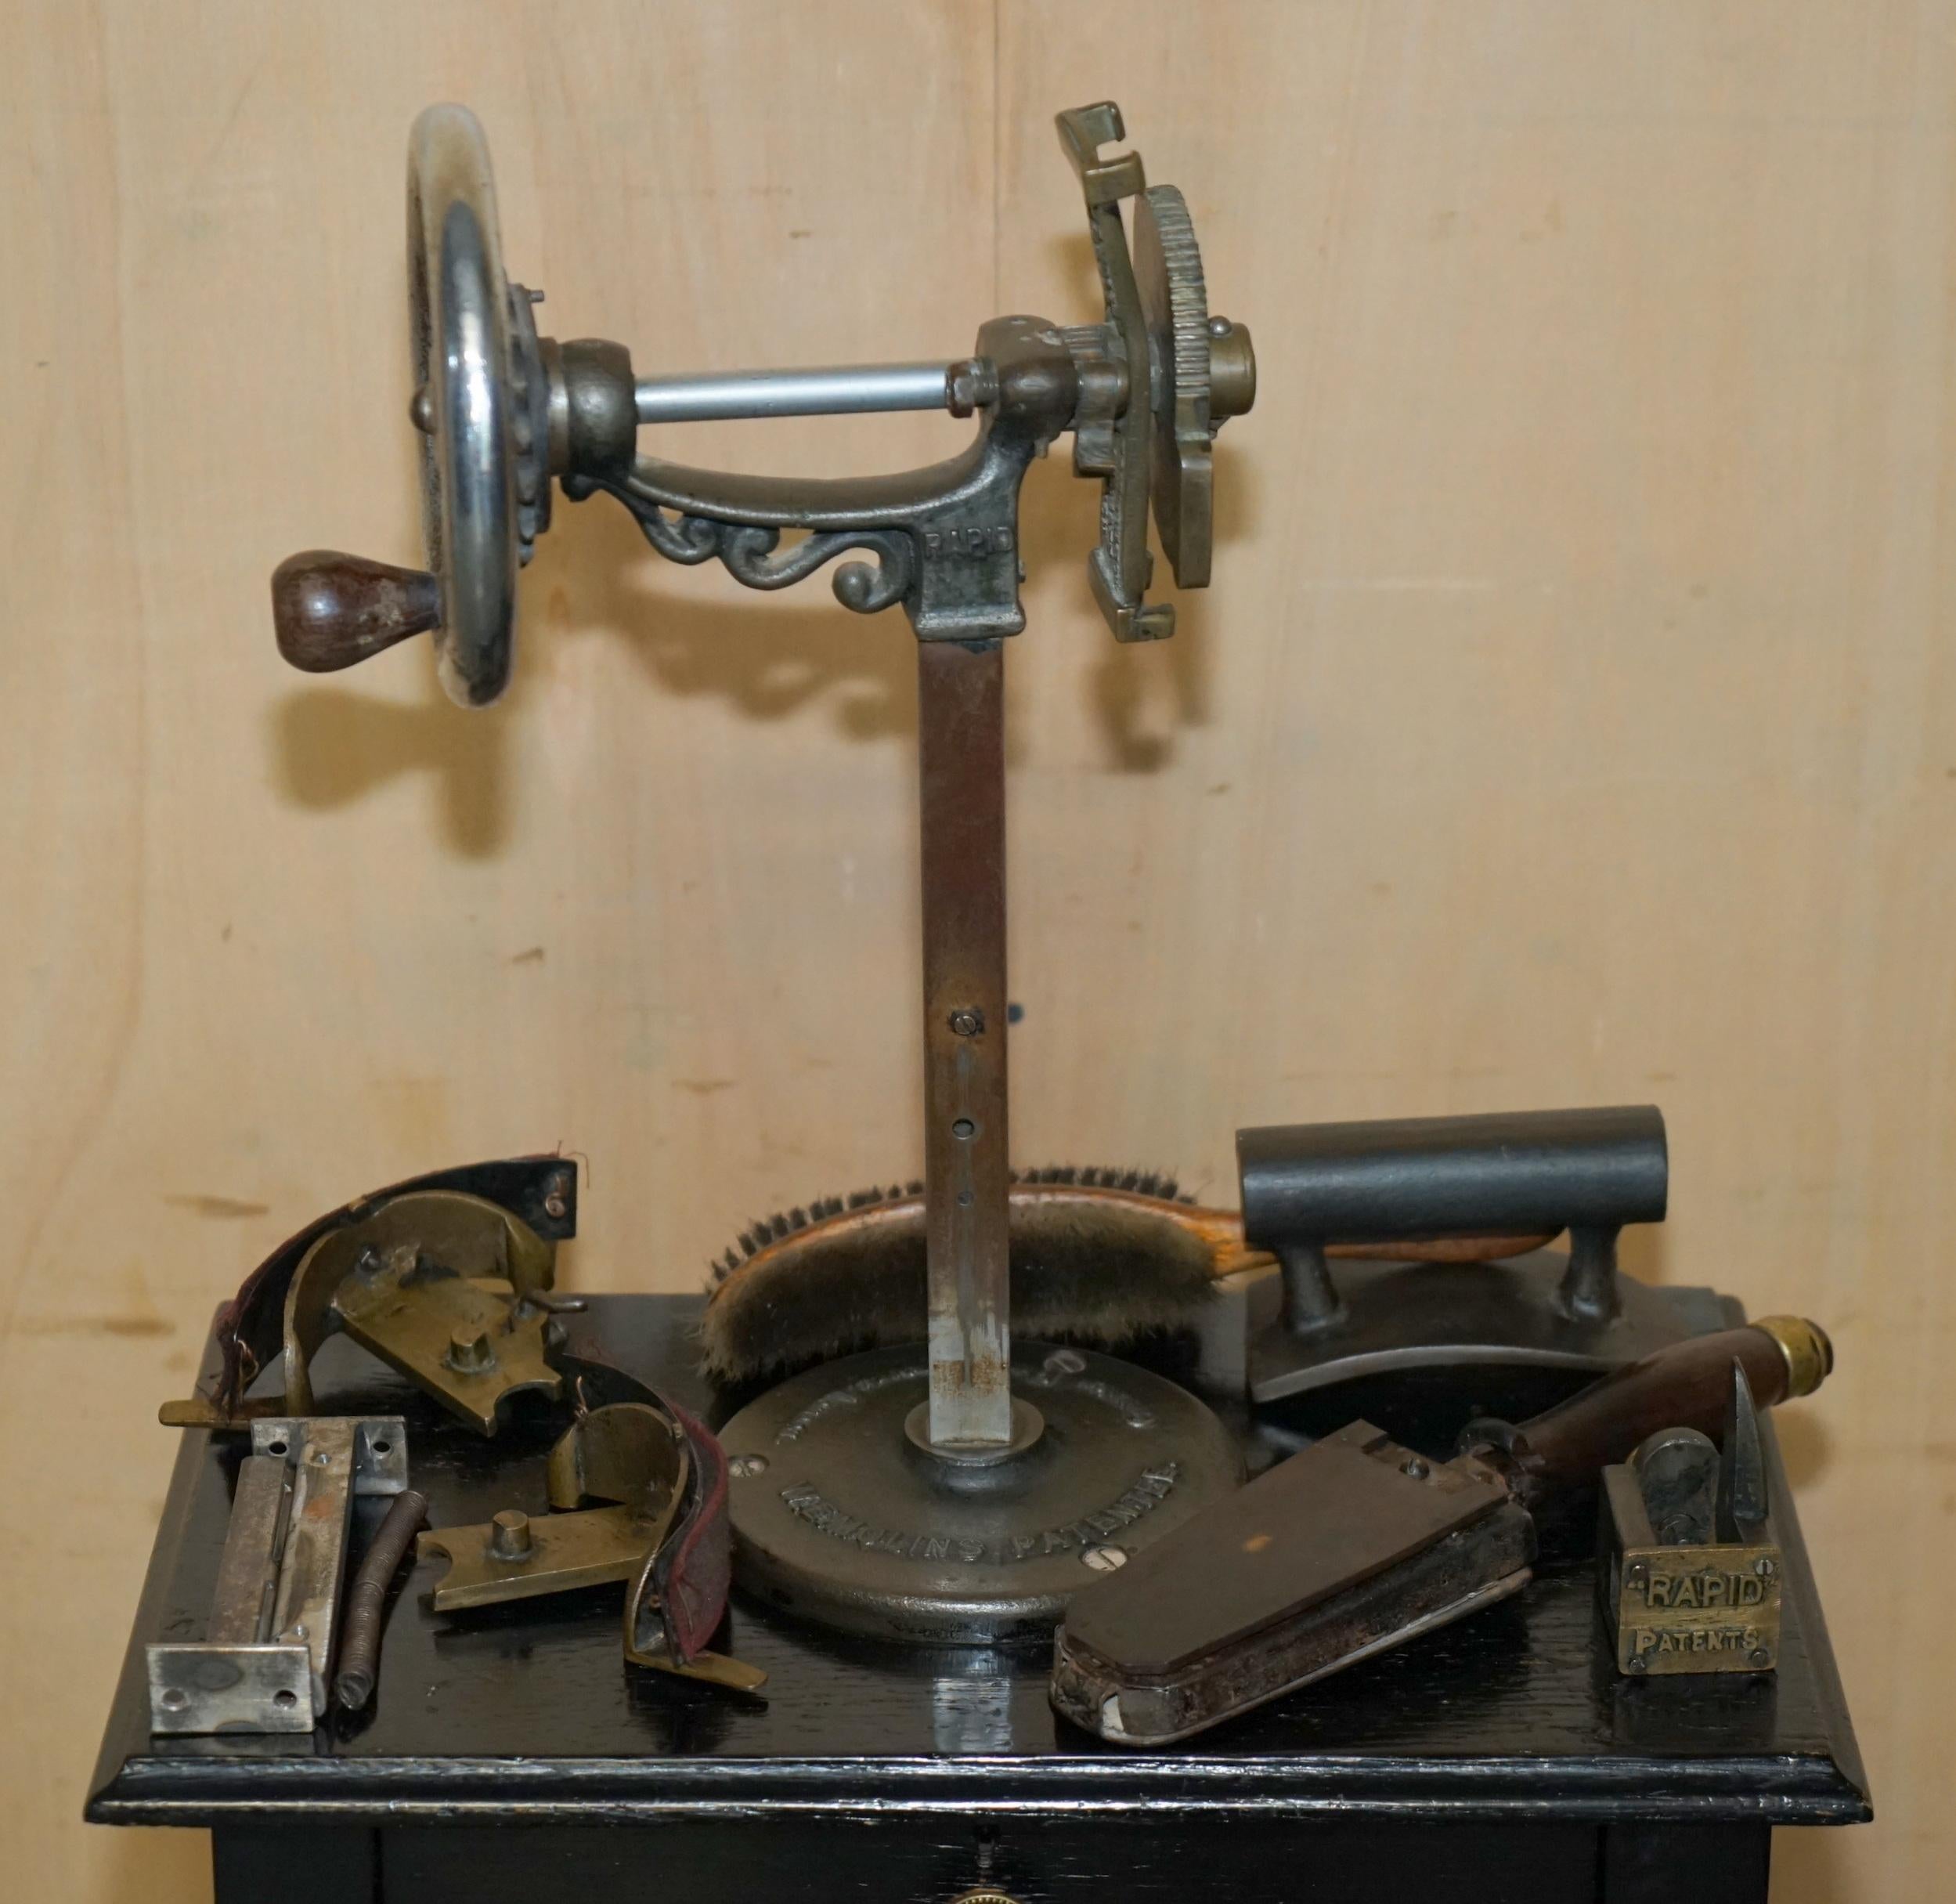 Royal House Antiques

Royal House Antiques is delighted to offer for sale this super rare, hand made, Walter Everette Mollins (1883-1935) machinists table with Rapid Patent machine and original parts 

Please note the delivery fee listed is just a